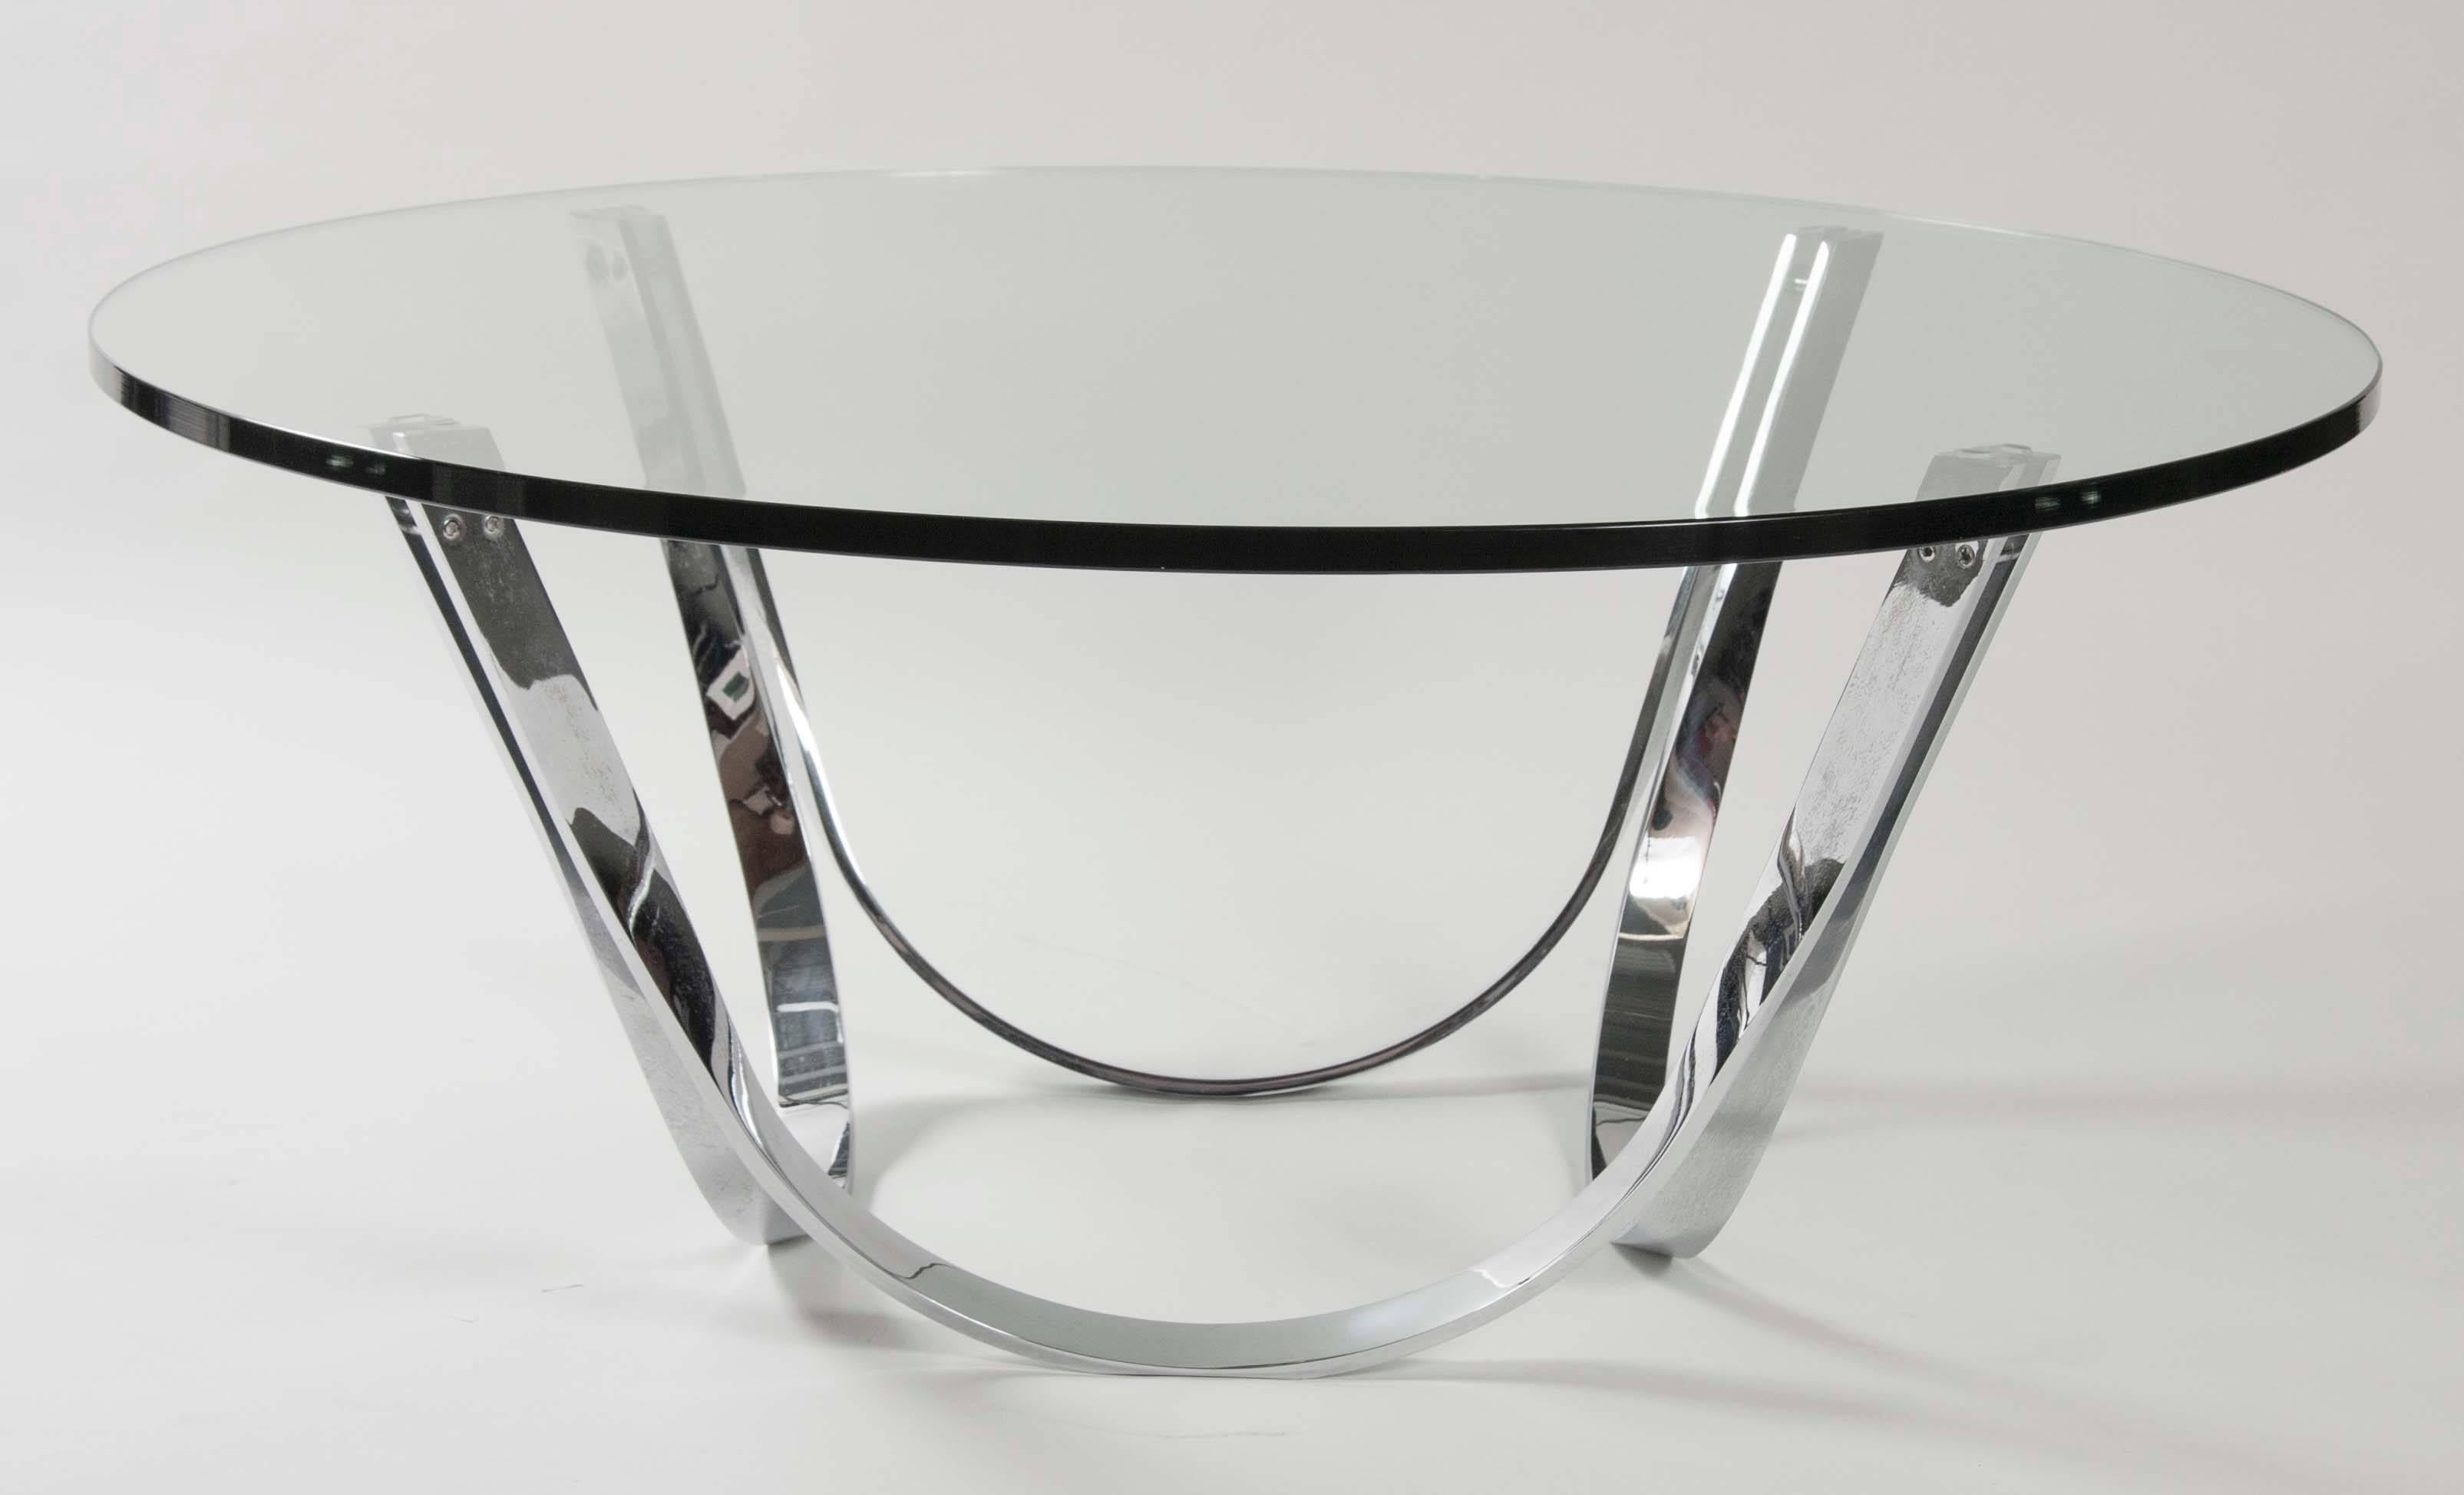 An elegant polished aluminum coffee table by Tri-Mark Designs with a tempered round glass top.